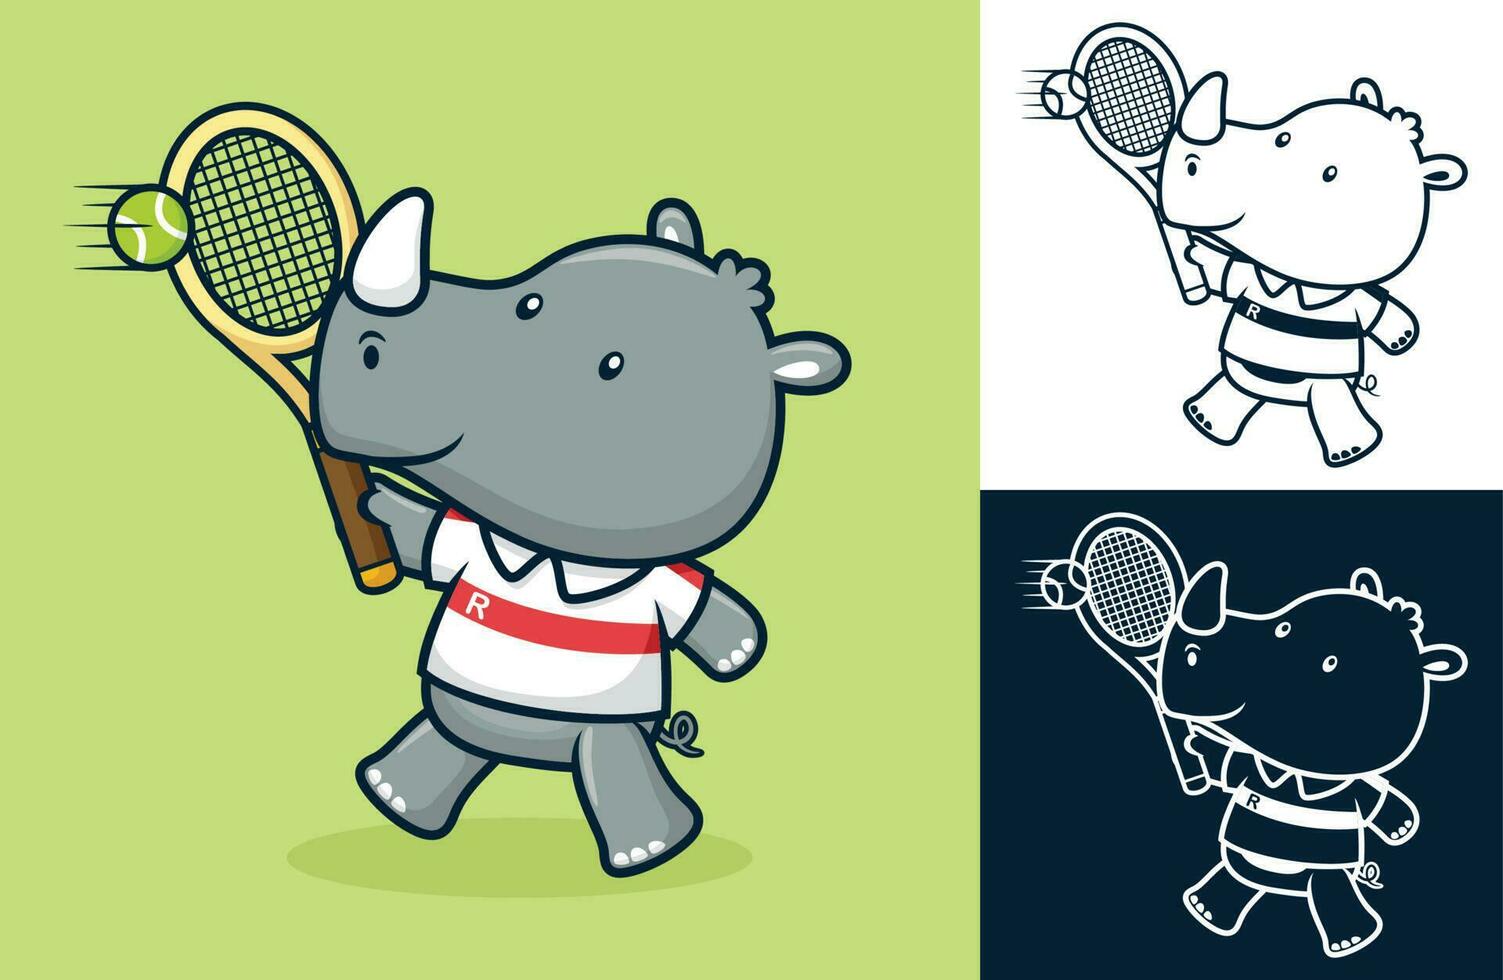 Cute rhino the tennis player. Vector cartoon illustration in flat icon style